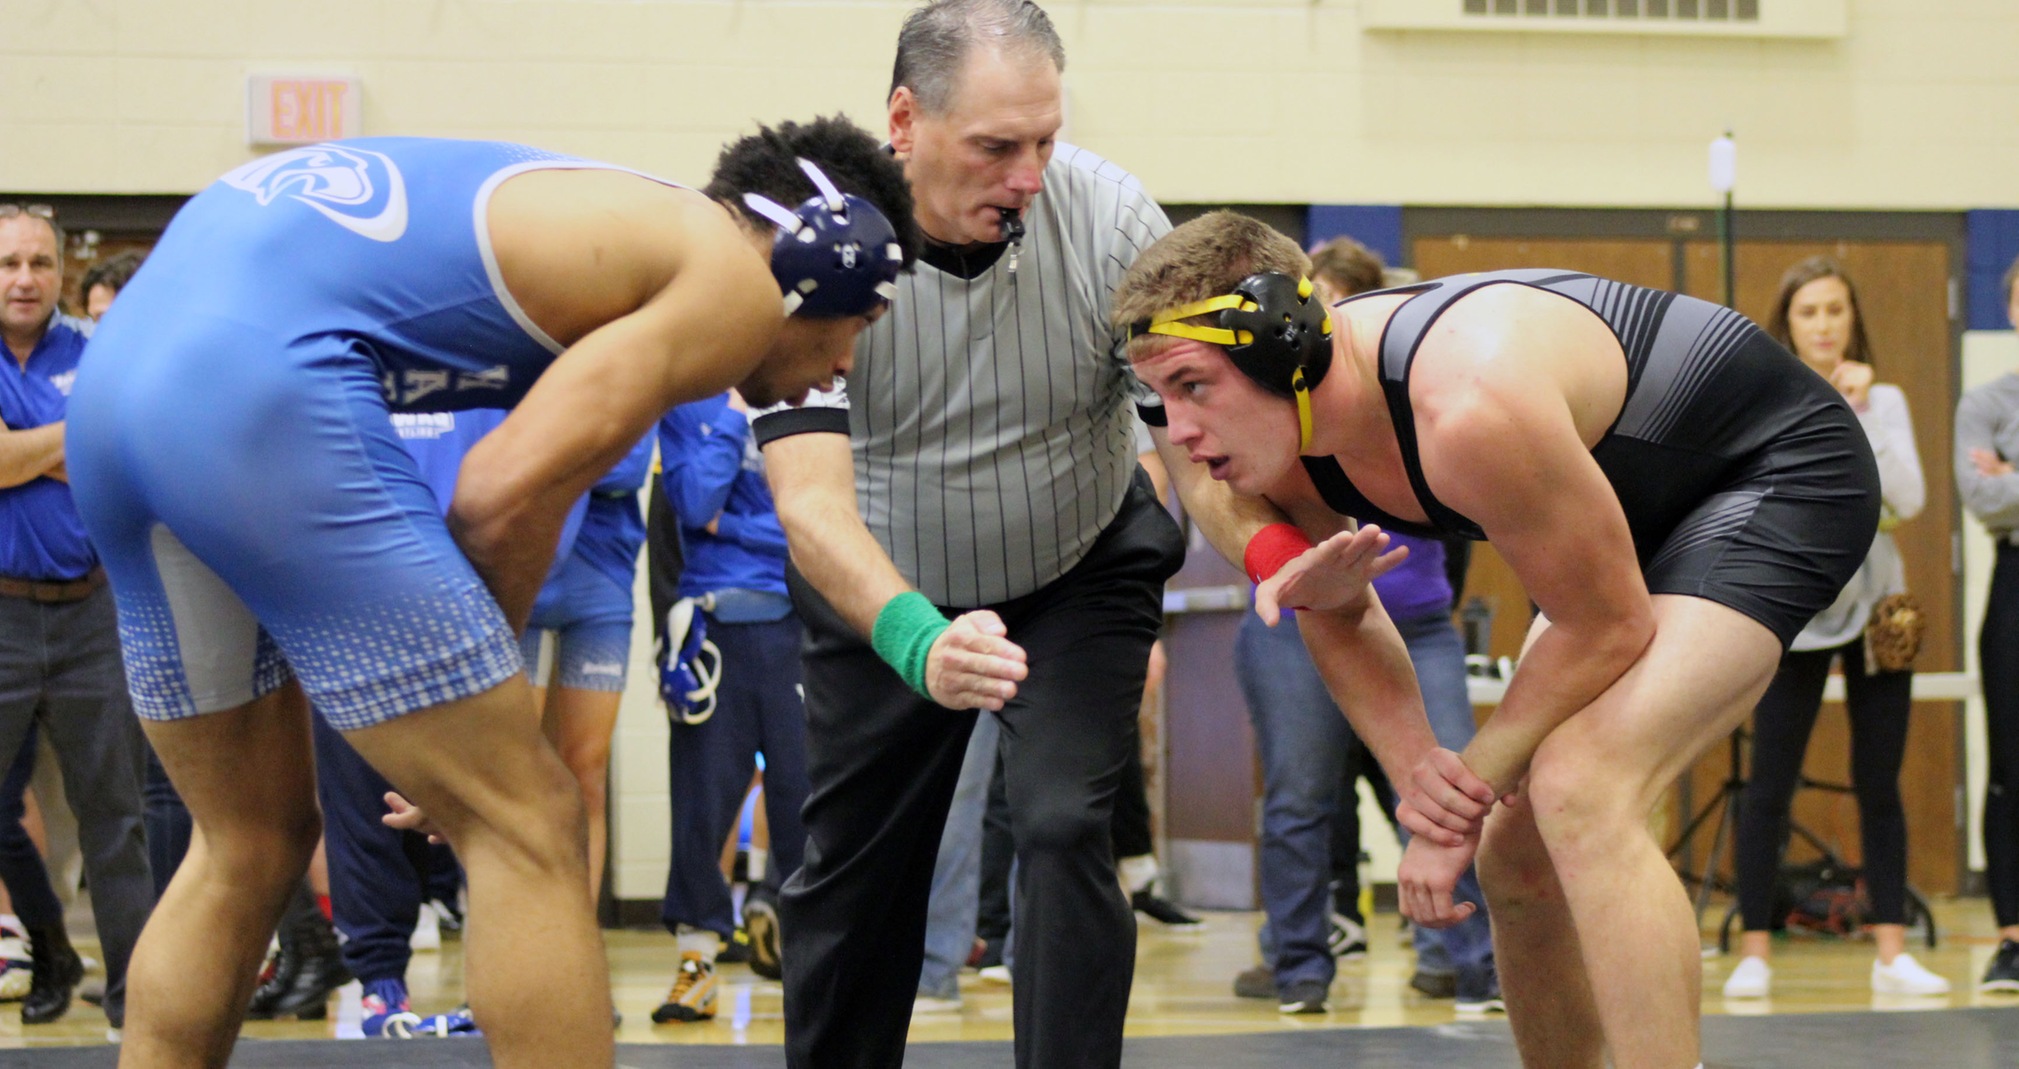 Colten Cashmore finished fifth in the 197-pound weight class at the Concordia University Wisconsin Open.